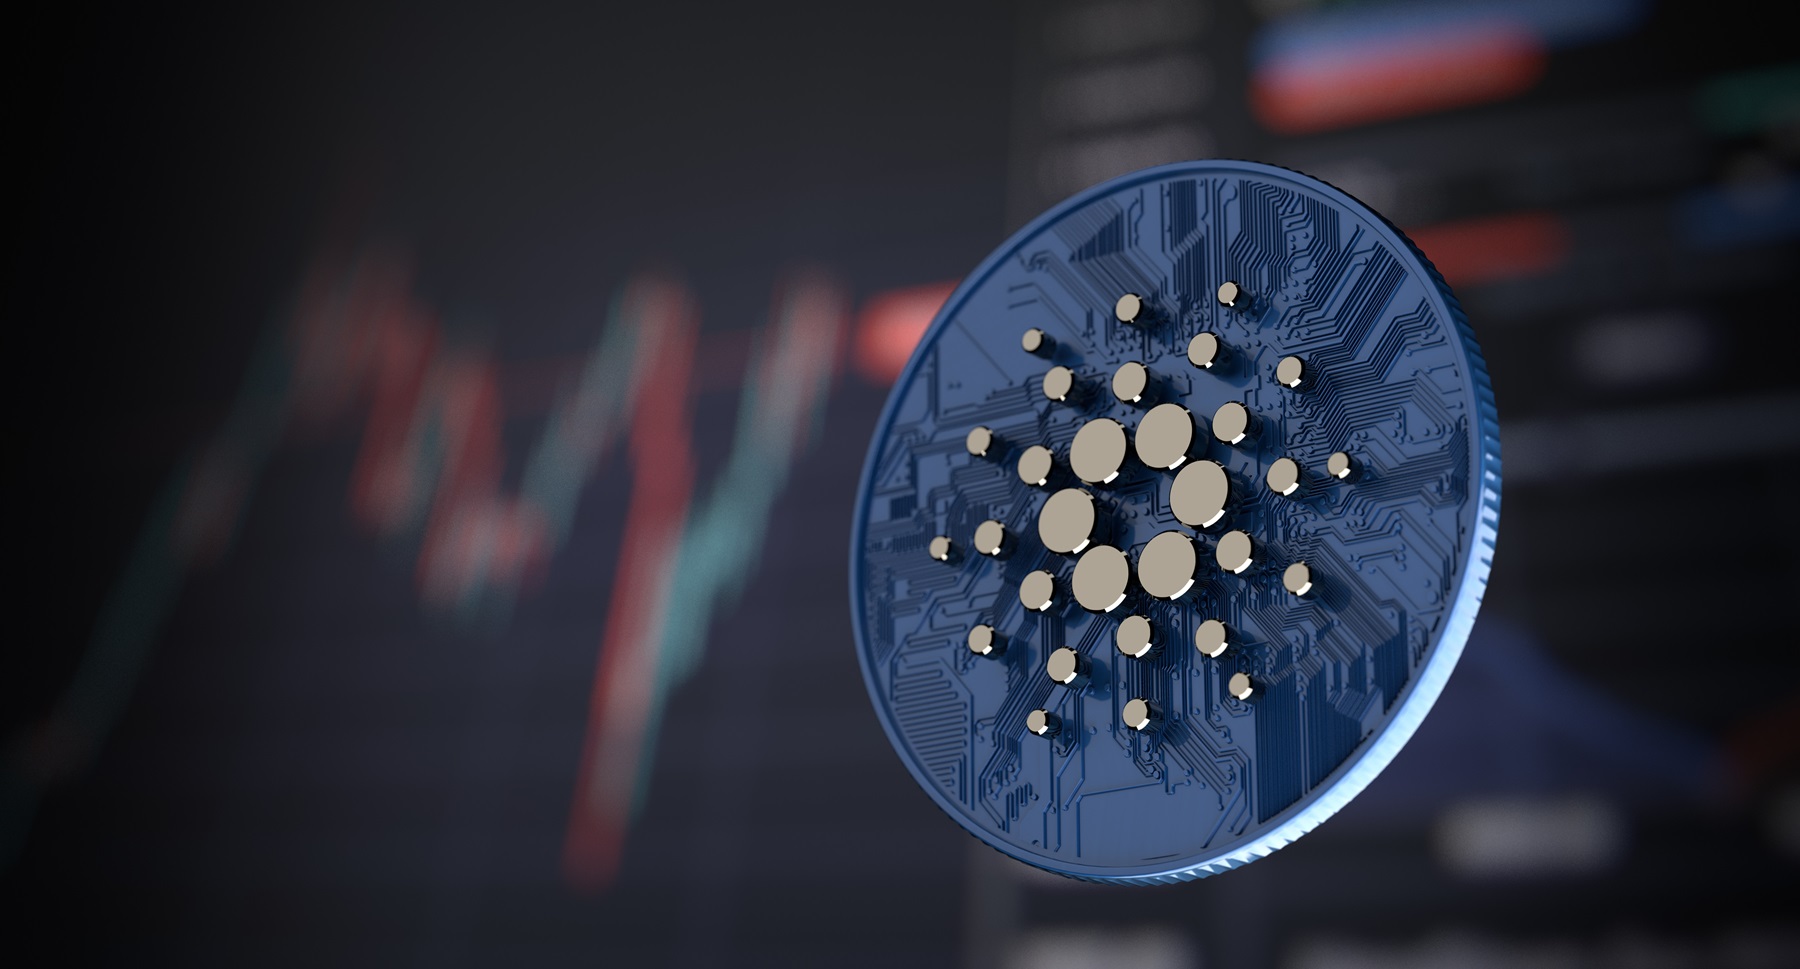 Cardano Foundation Gears Up For Chang Hard Fork